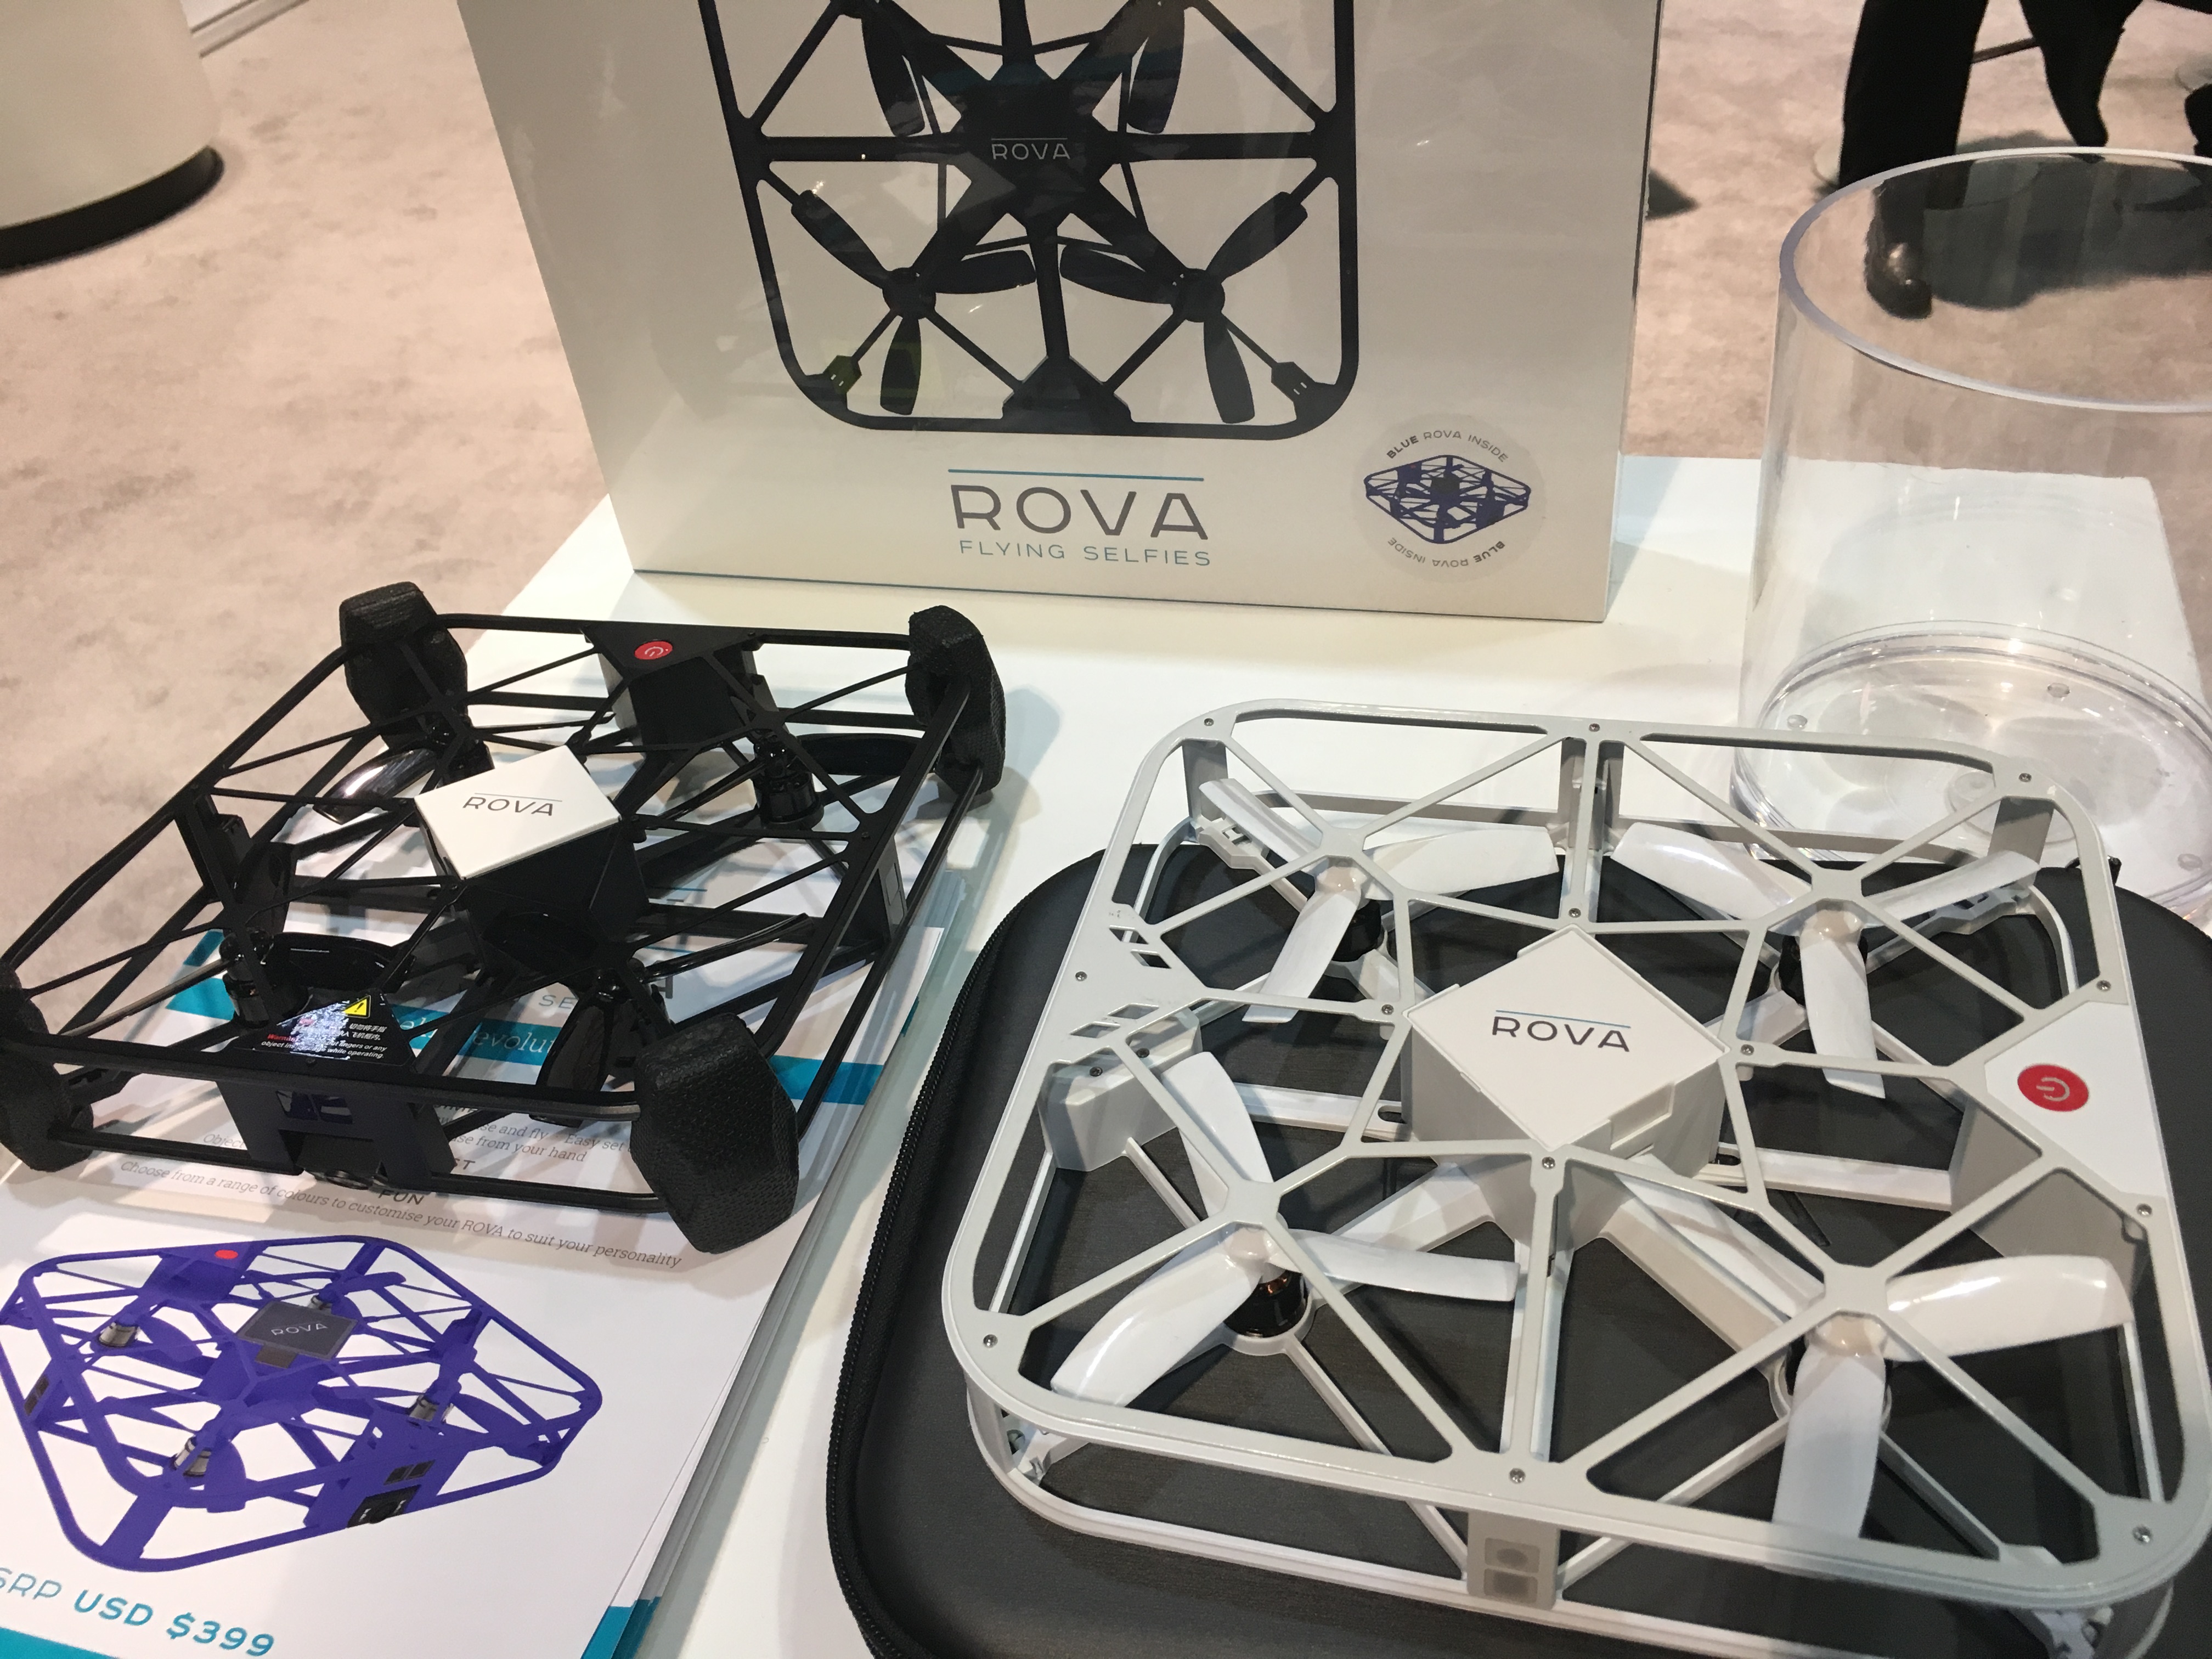 AEE Rova was $399 at CES 2017